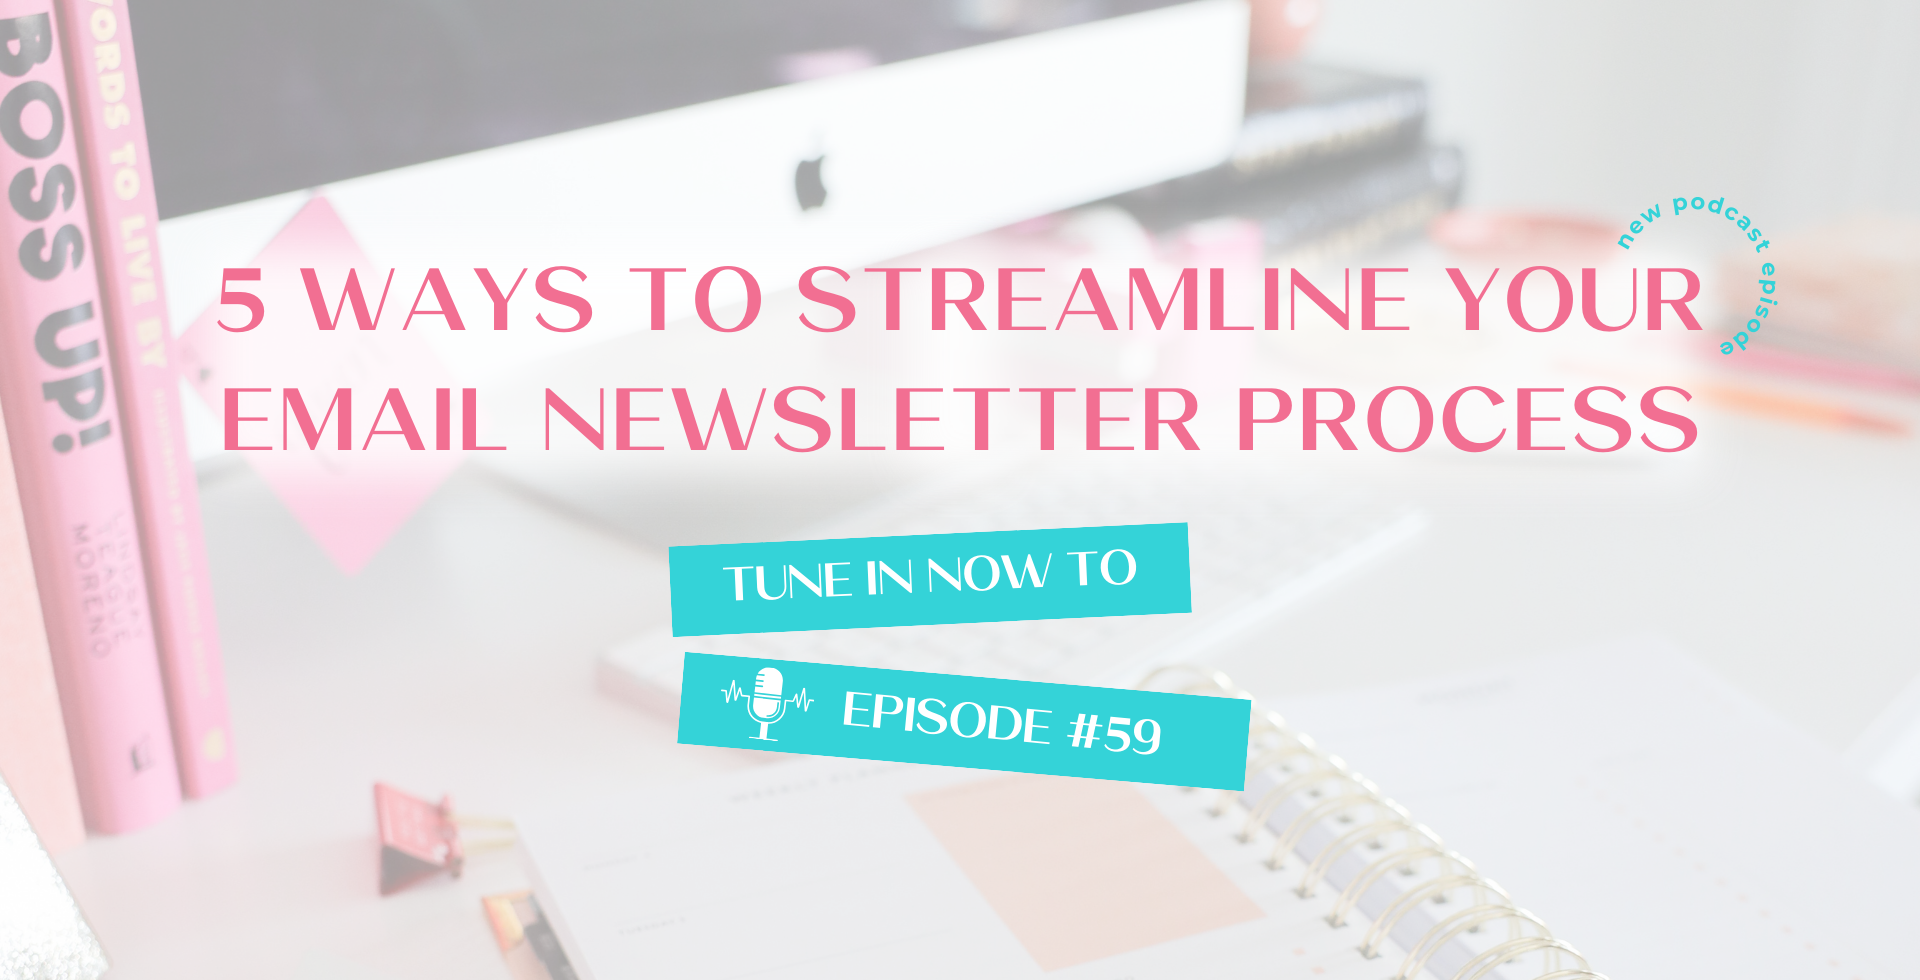 5 Ways to Streamline Your Email Newsletter Process | 59